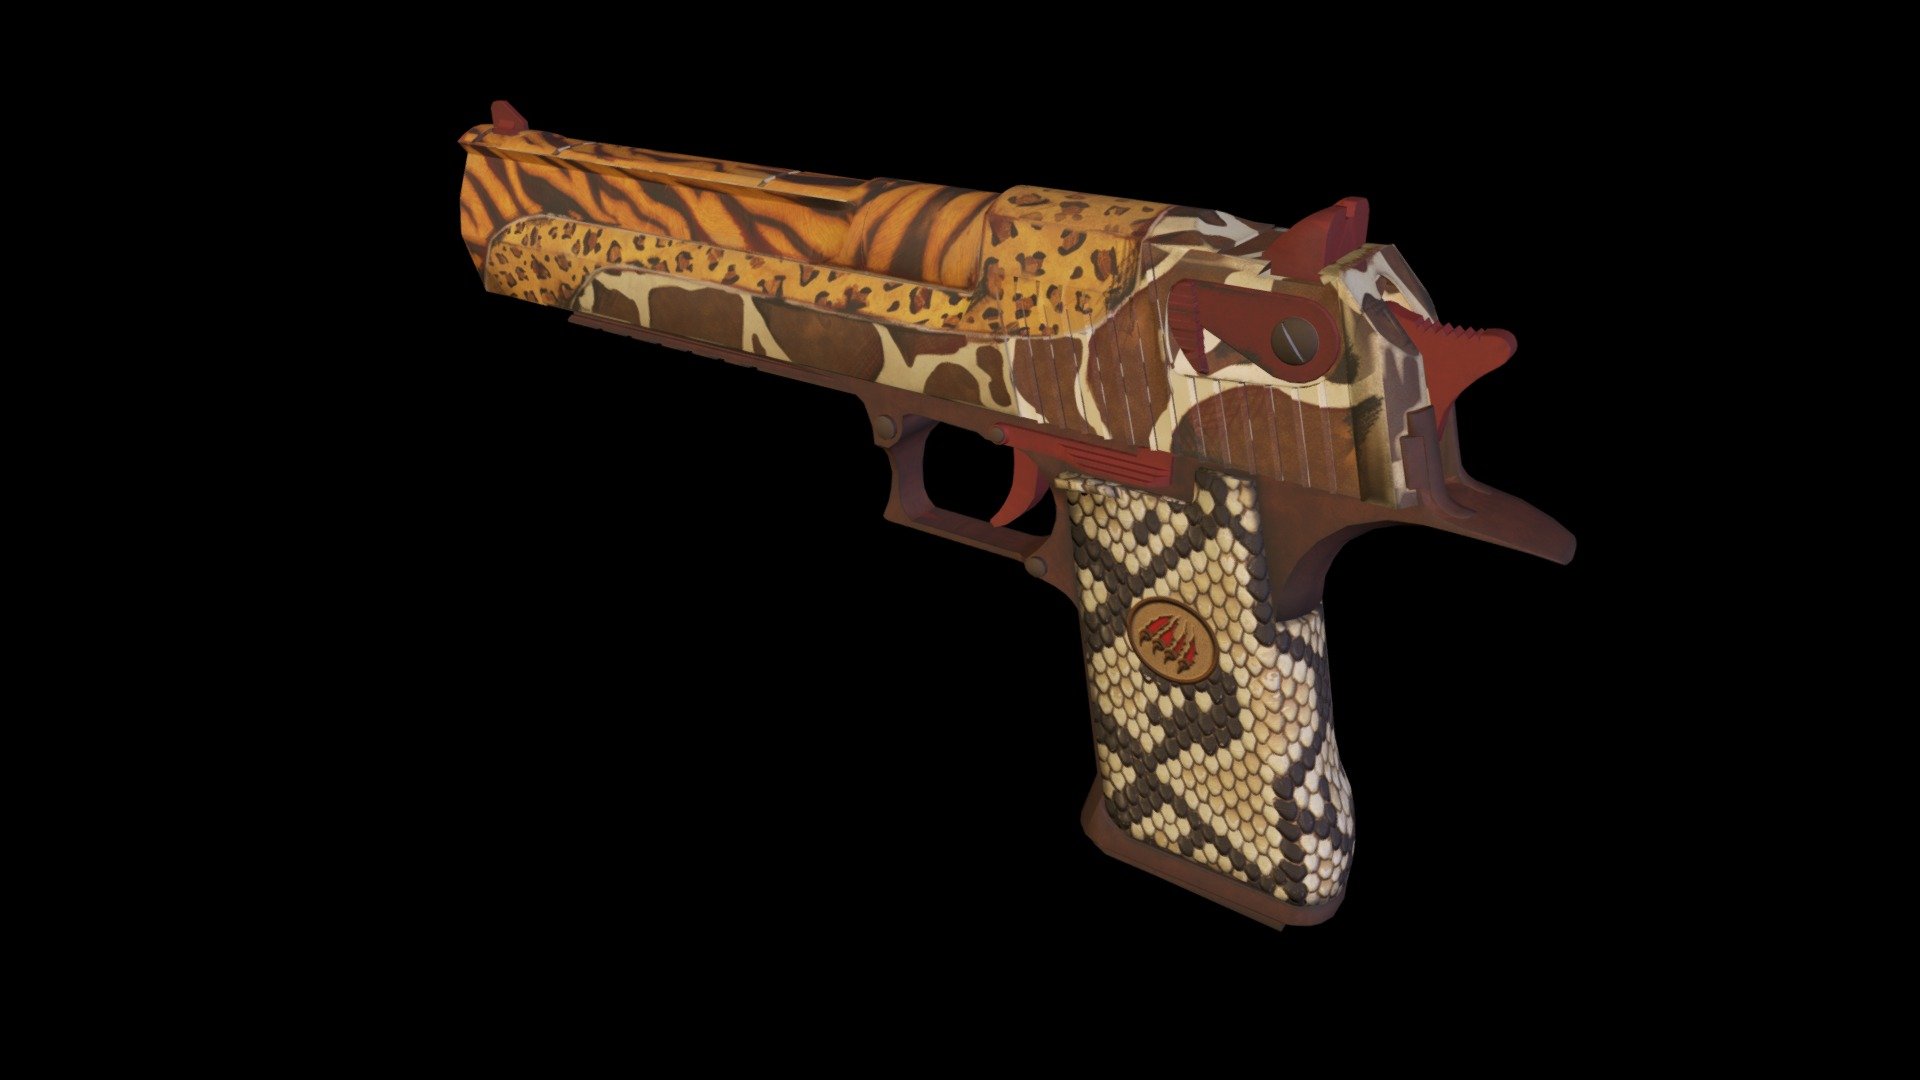 A new skin for CS:GO featuring a combination of different animal print for the finish called &ldquo;Beastmaster